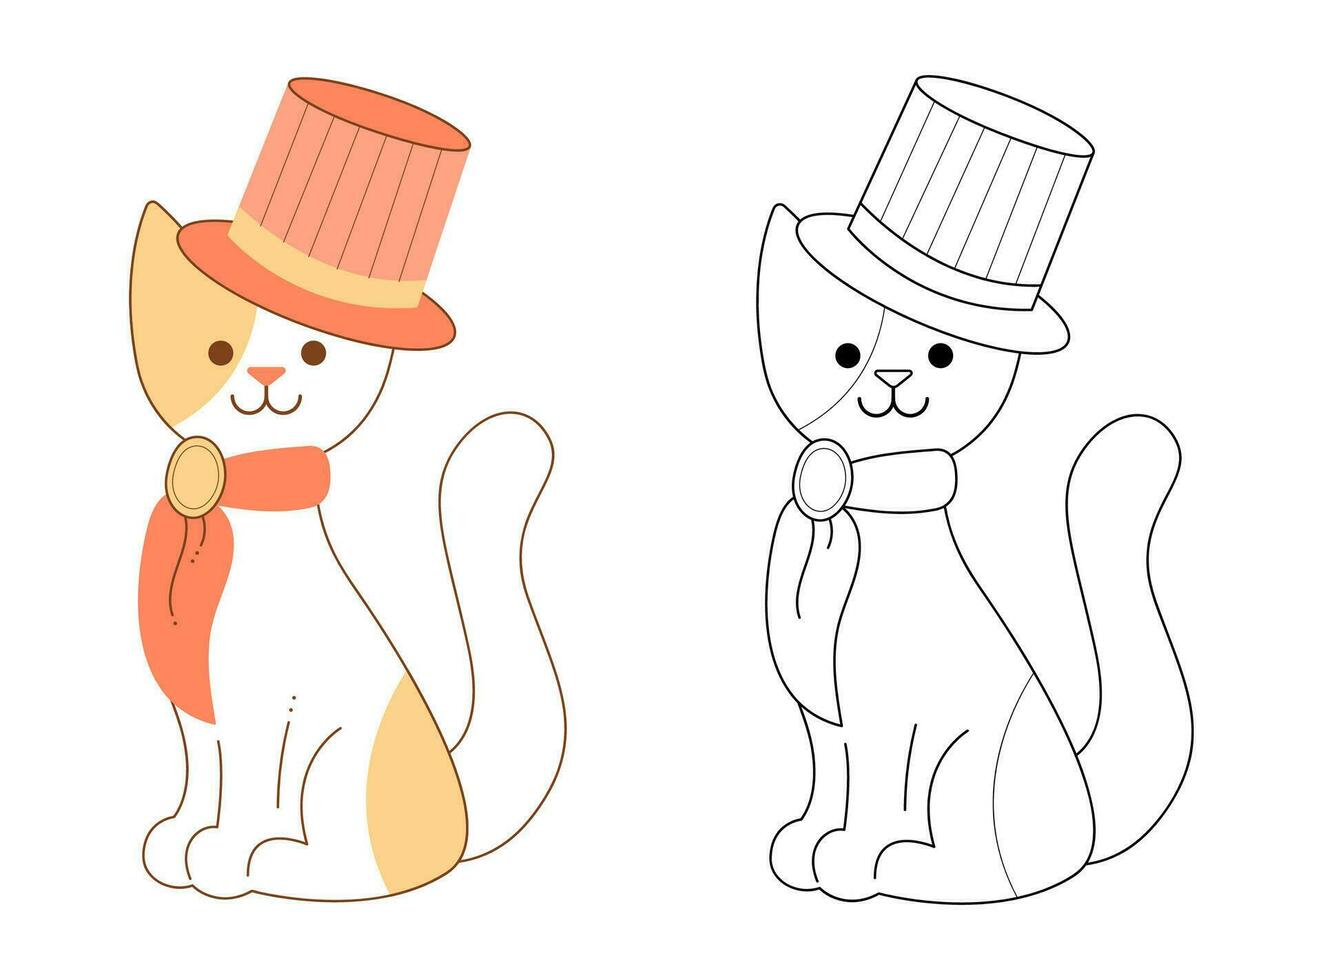 Cute cat character with top hat and neckerchief. Flat color and black and white vector illustration.